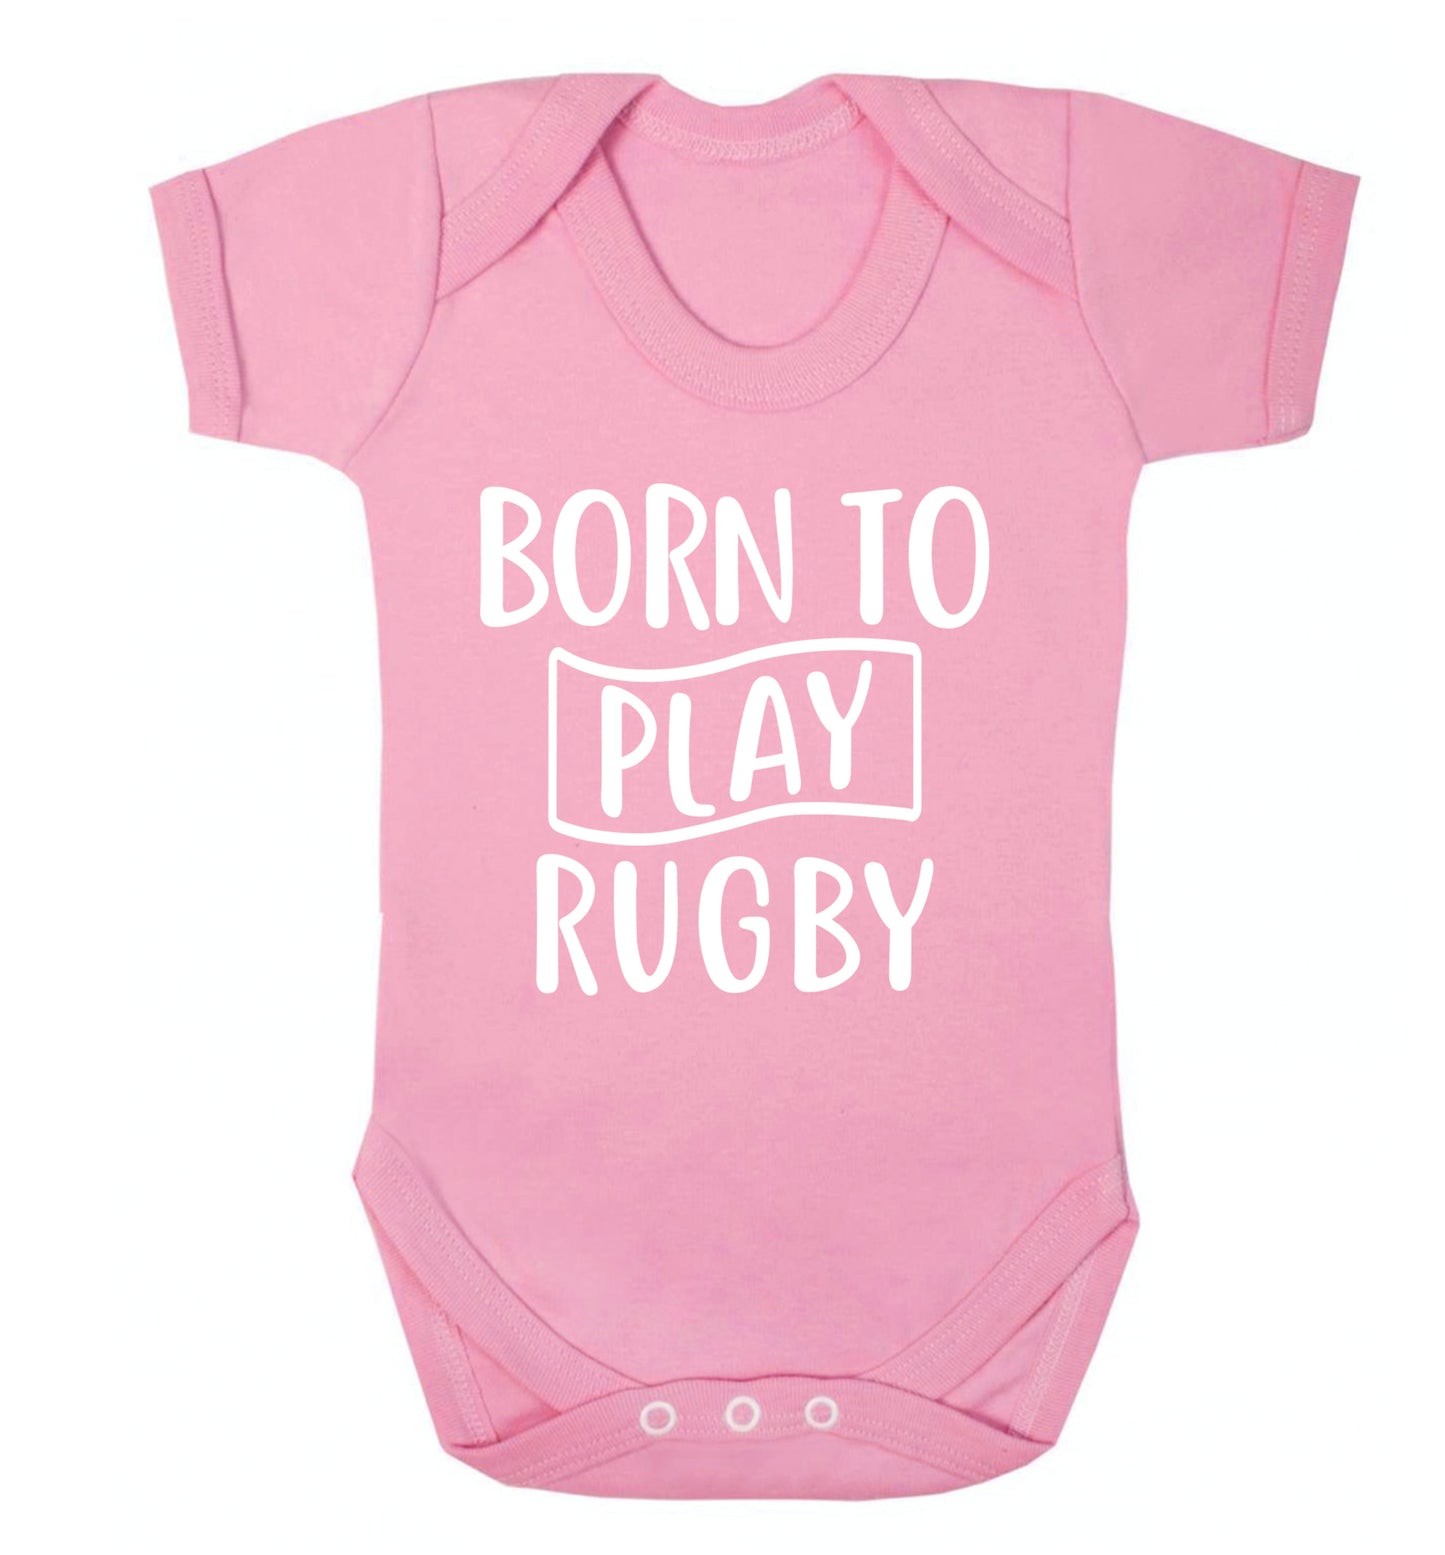 Born to play rugby Baby Vest pale pink 18-24 months